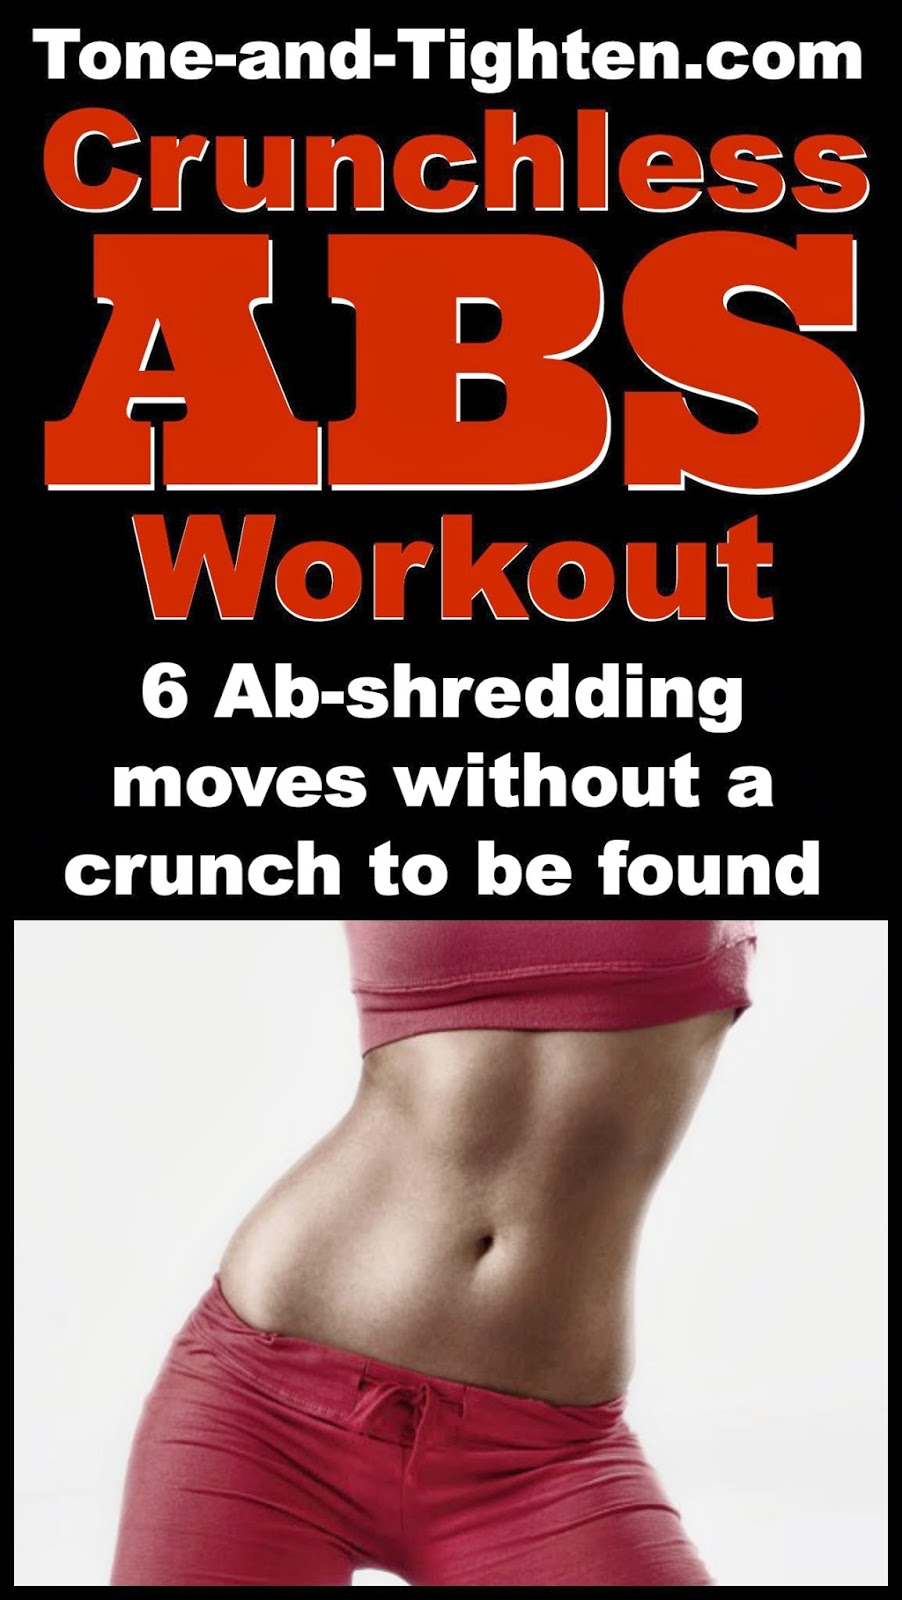 Ab workout without crunches – 6 moves to a stronger core